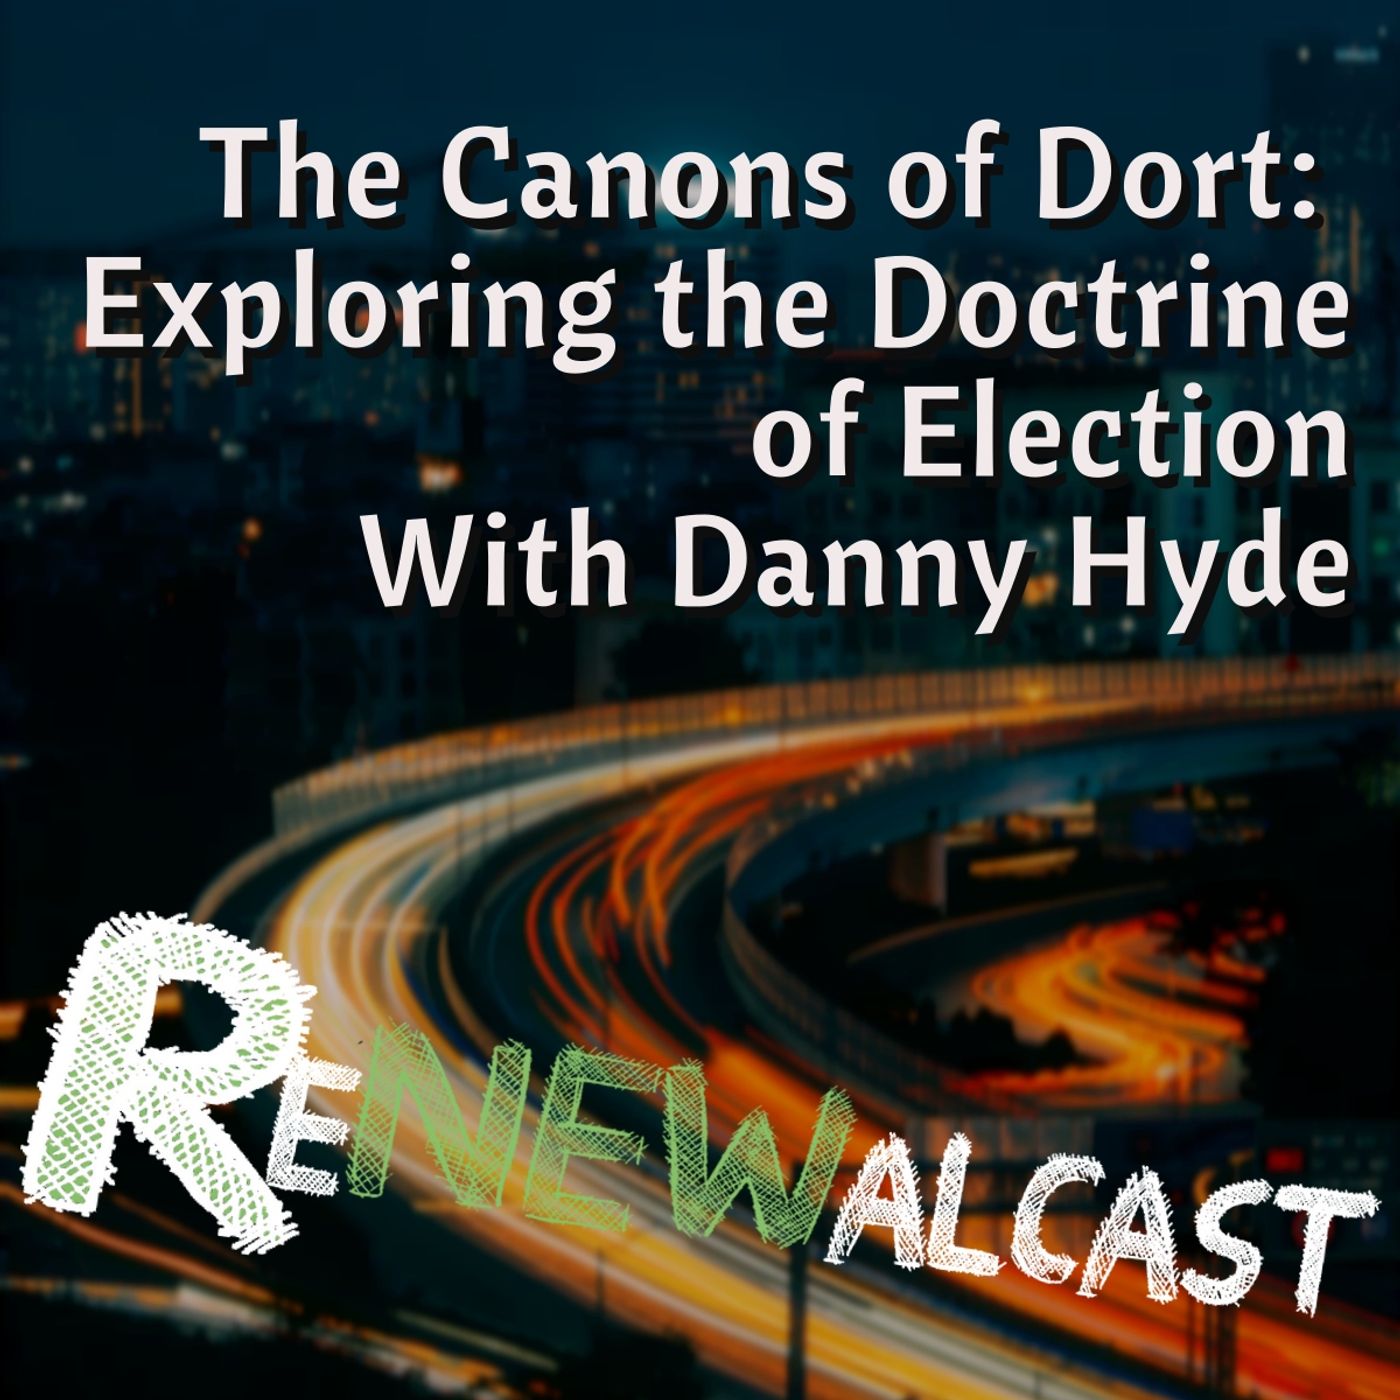 The Canons of Dort: Exploring the Doctrine of Election With Danny Hyde